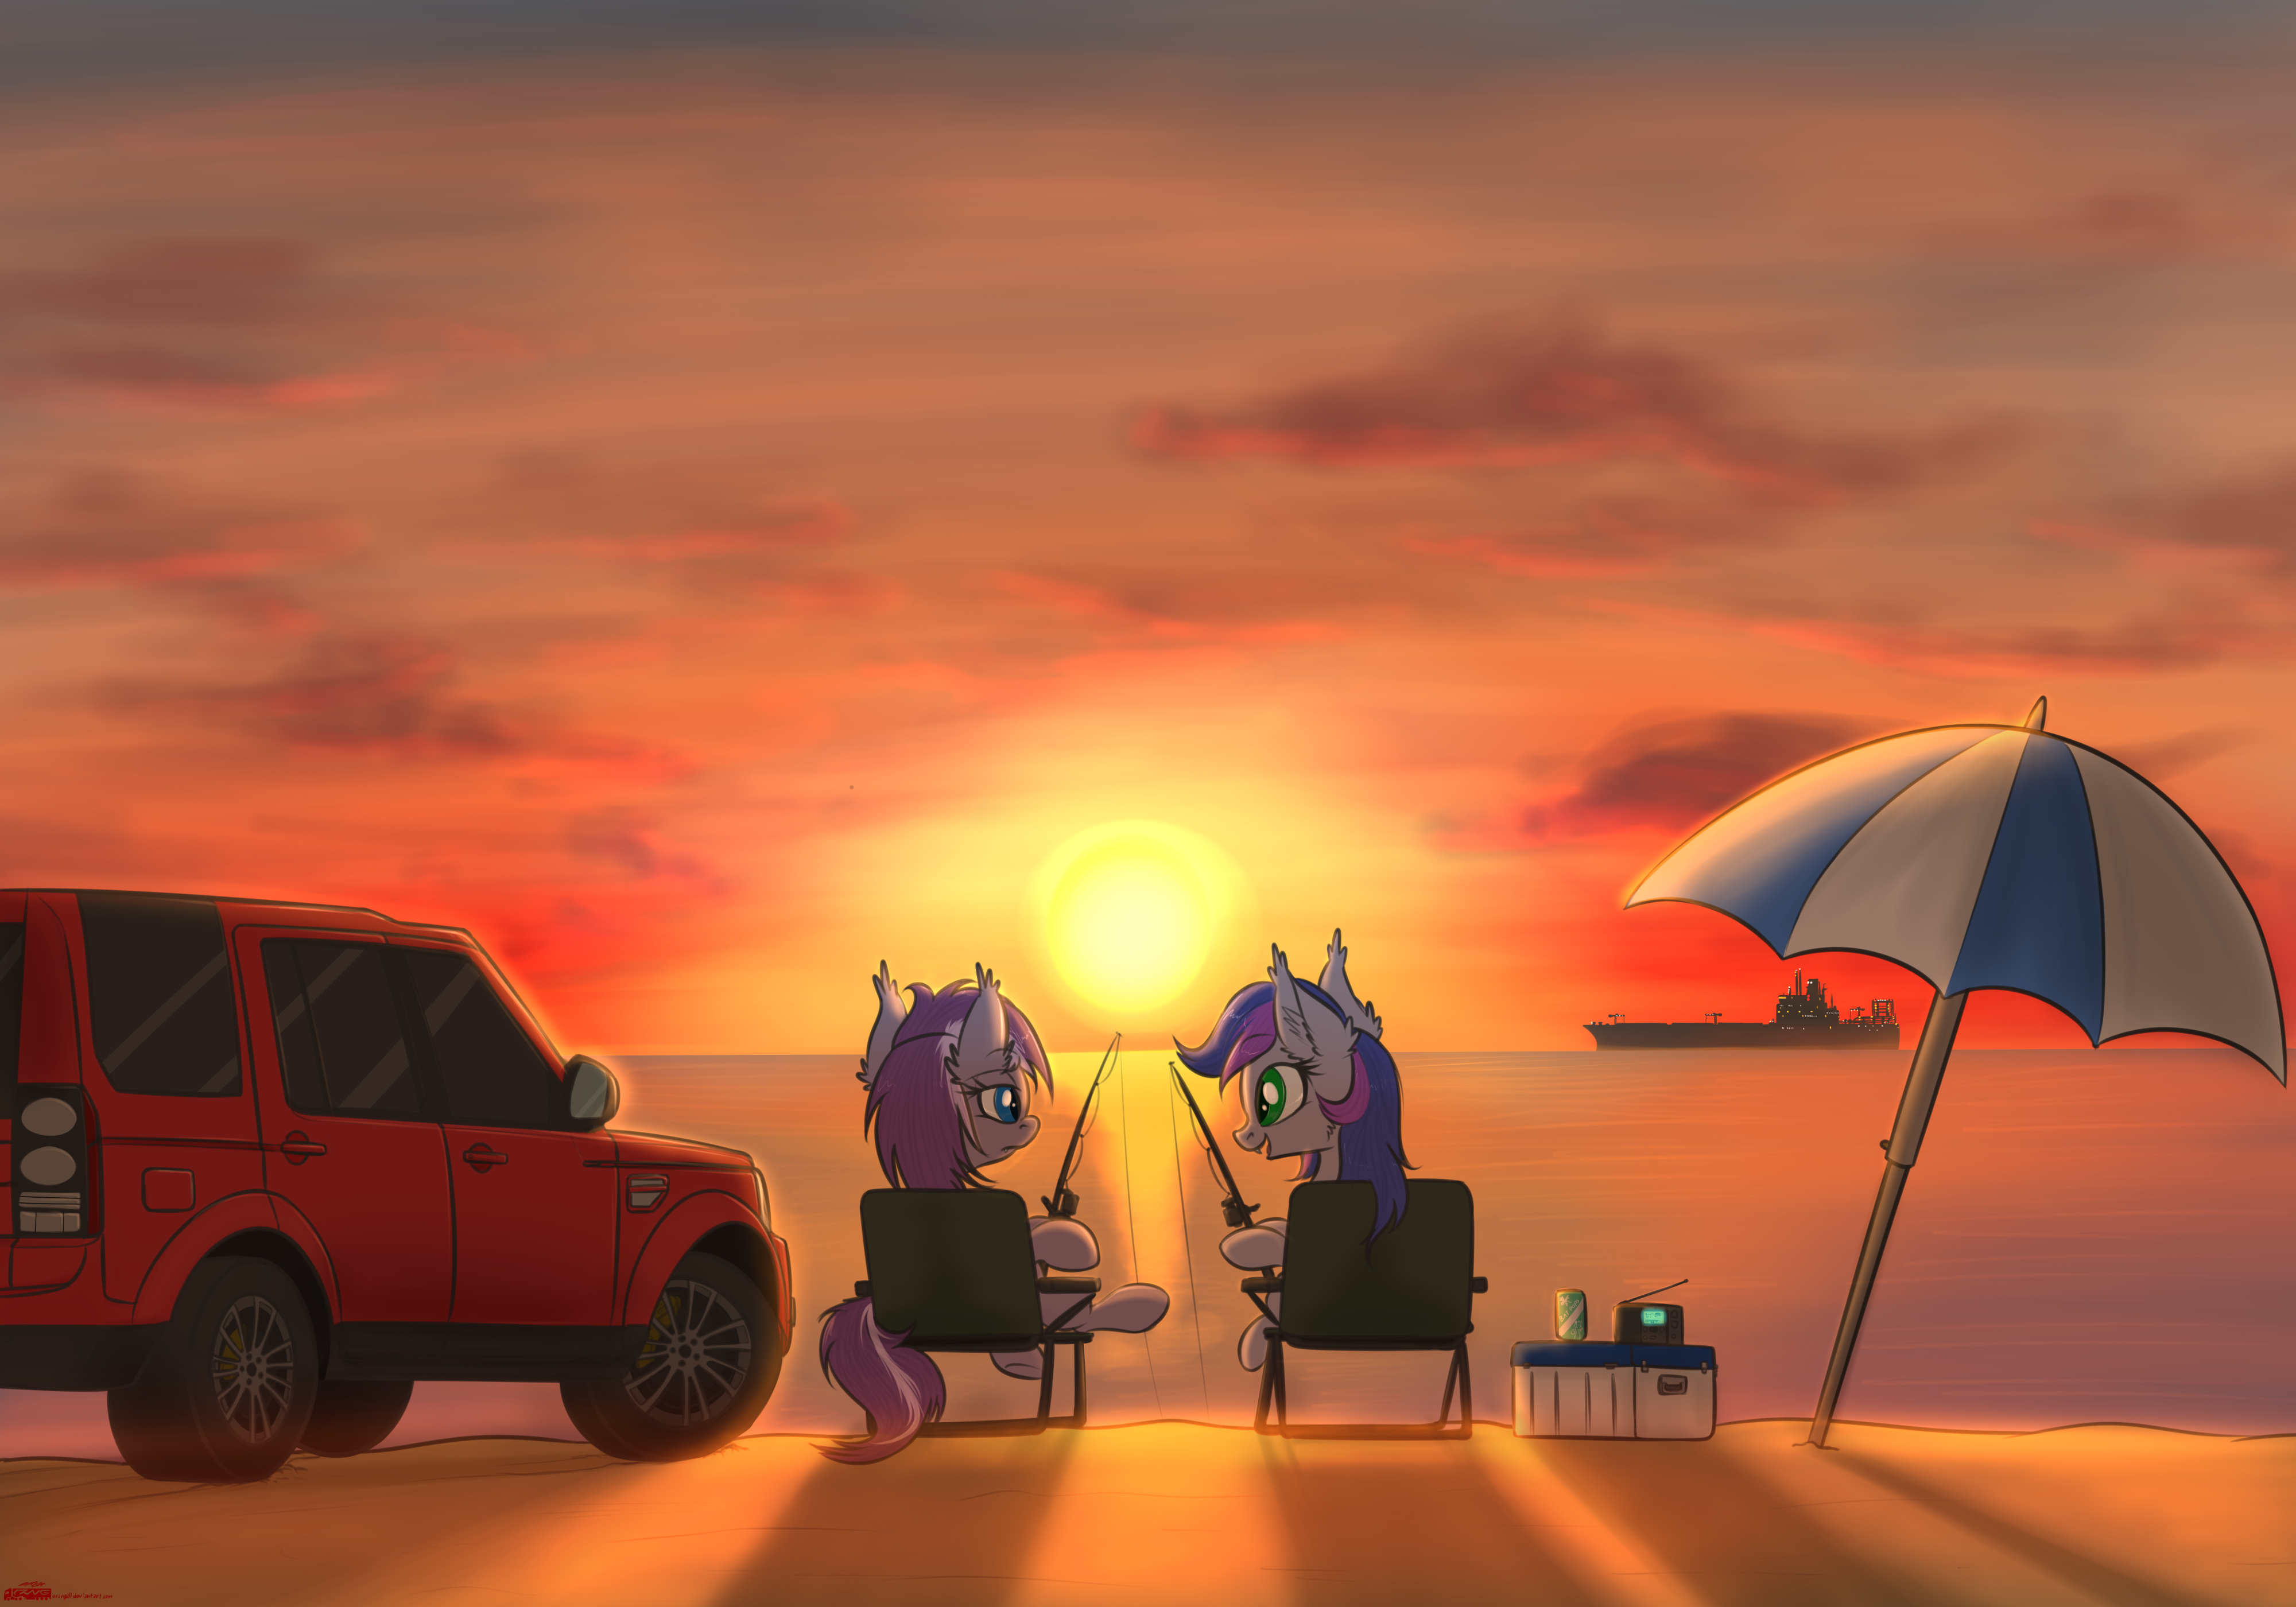 Beach in the fall evening by orang111 on DeviantArt